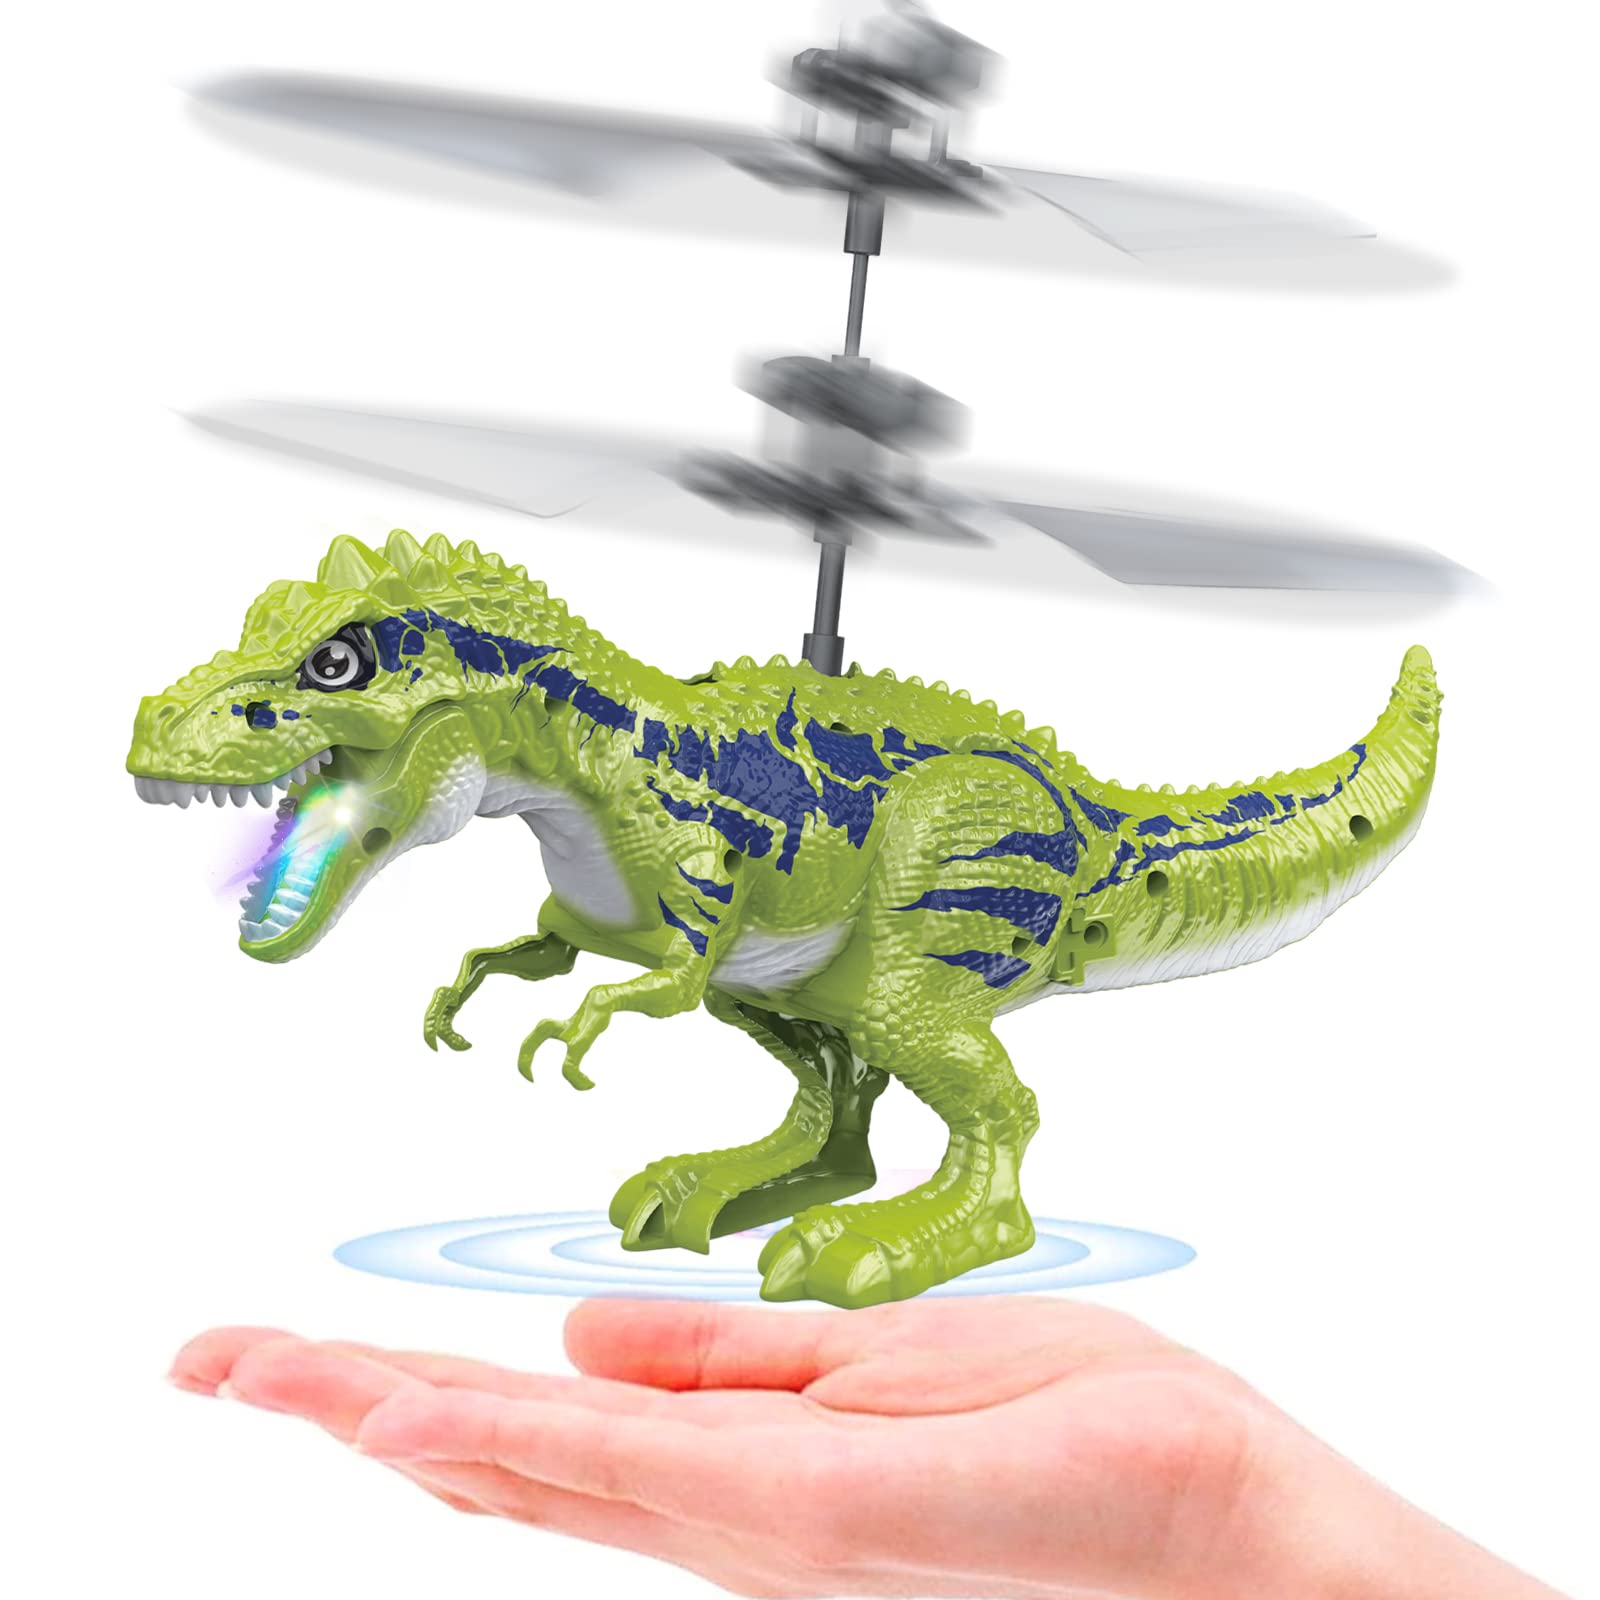 KPPIT Dinosaur Toys Upgraded Flying Toy Ball Infrared Induction RC Flying Ball Toy for Kids Boys Girls Gifts LED Light Helicopter Flying Drone Indoor and Outdoor Games Toys for Year Old